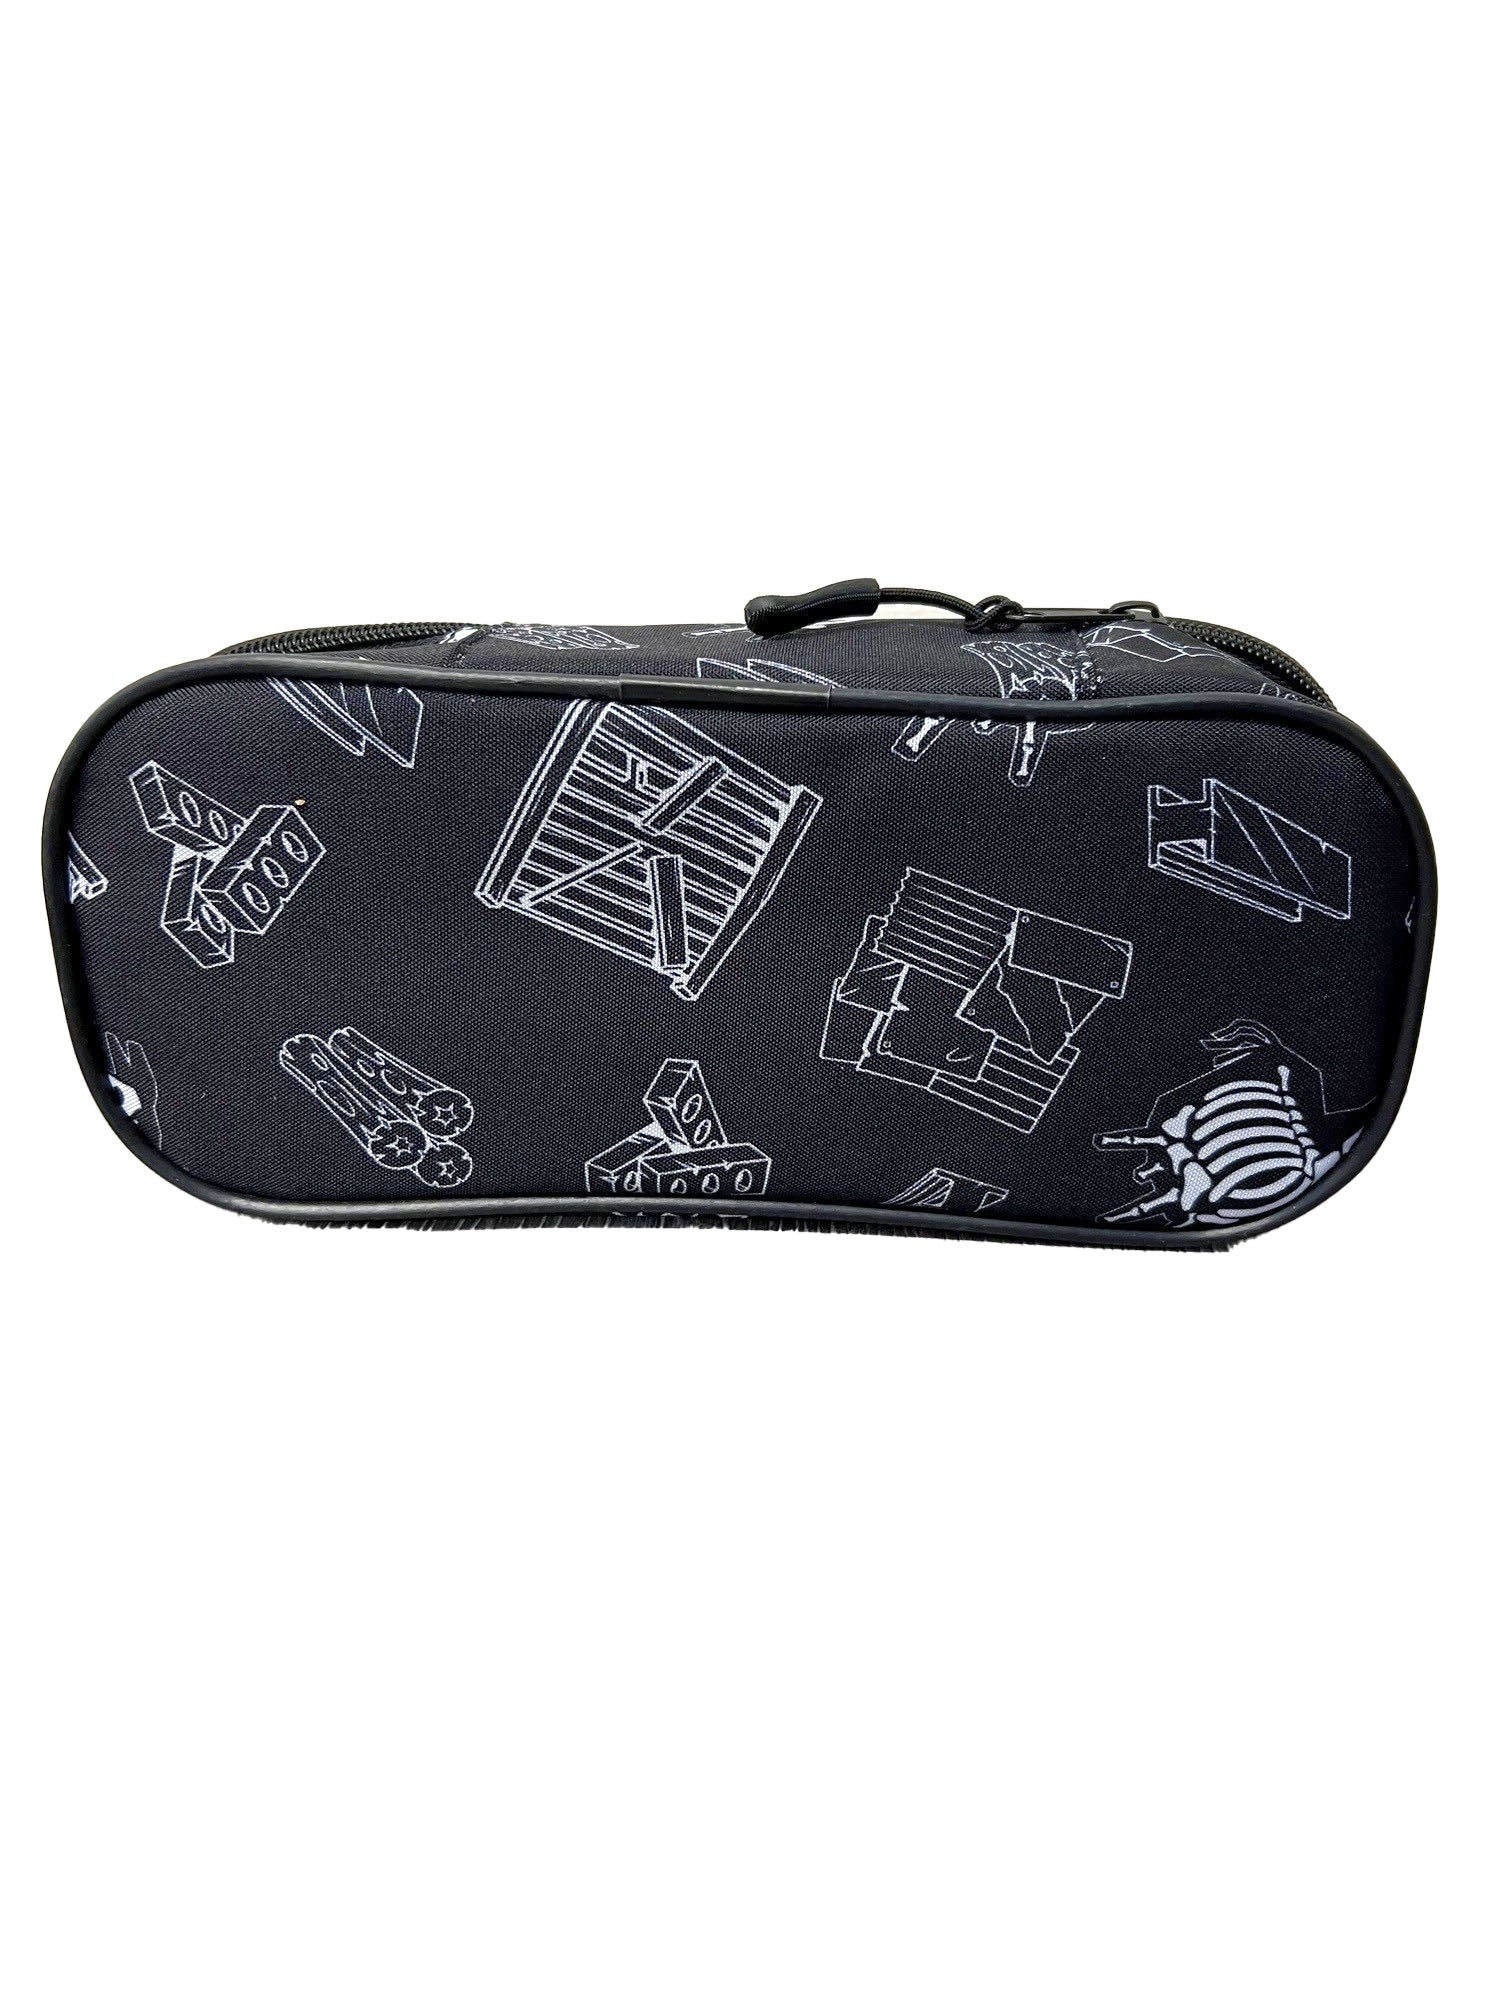 FORTNITE Large Oval Pencil Case X-Ray Design for Boys Kids Pencil Case Spacious Compartments Fortnite Grey Barrel Pencil Cases School Stationery Supplies, Gifts for Gamers Boys Girls Teenagers